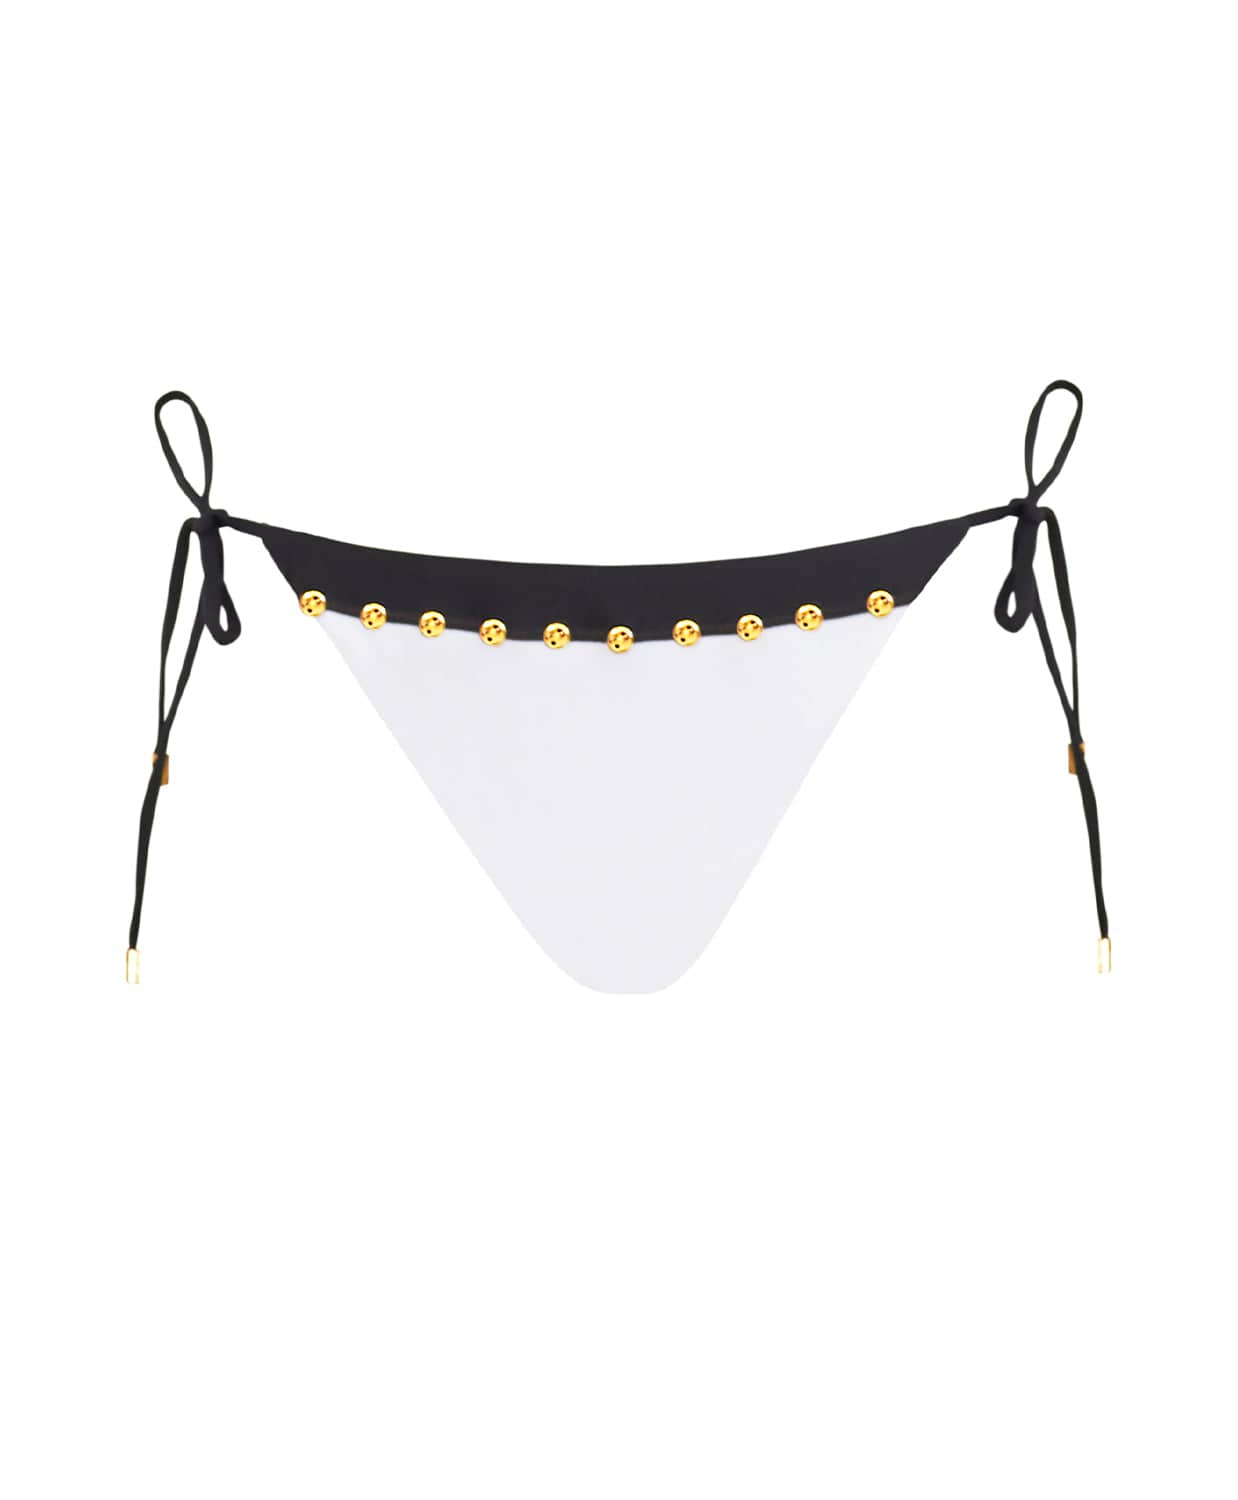 A black and white triangle bikini bottom with stud details. Featured against a white wall background.